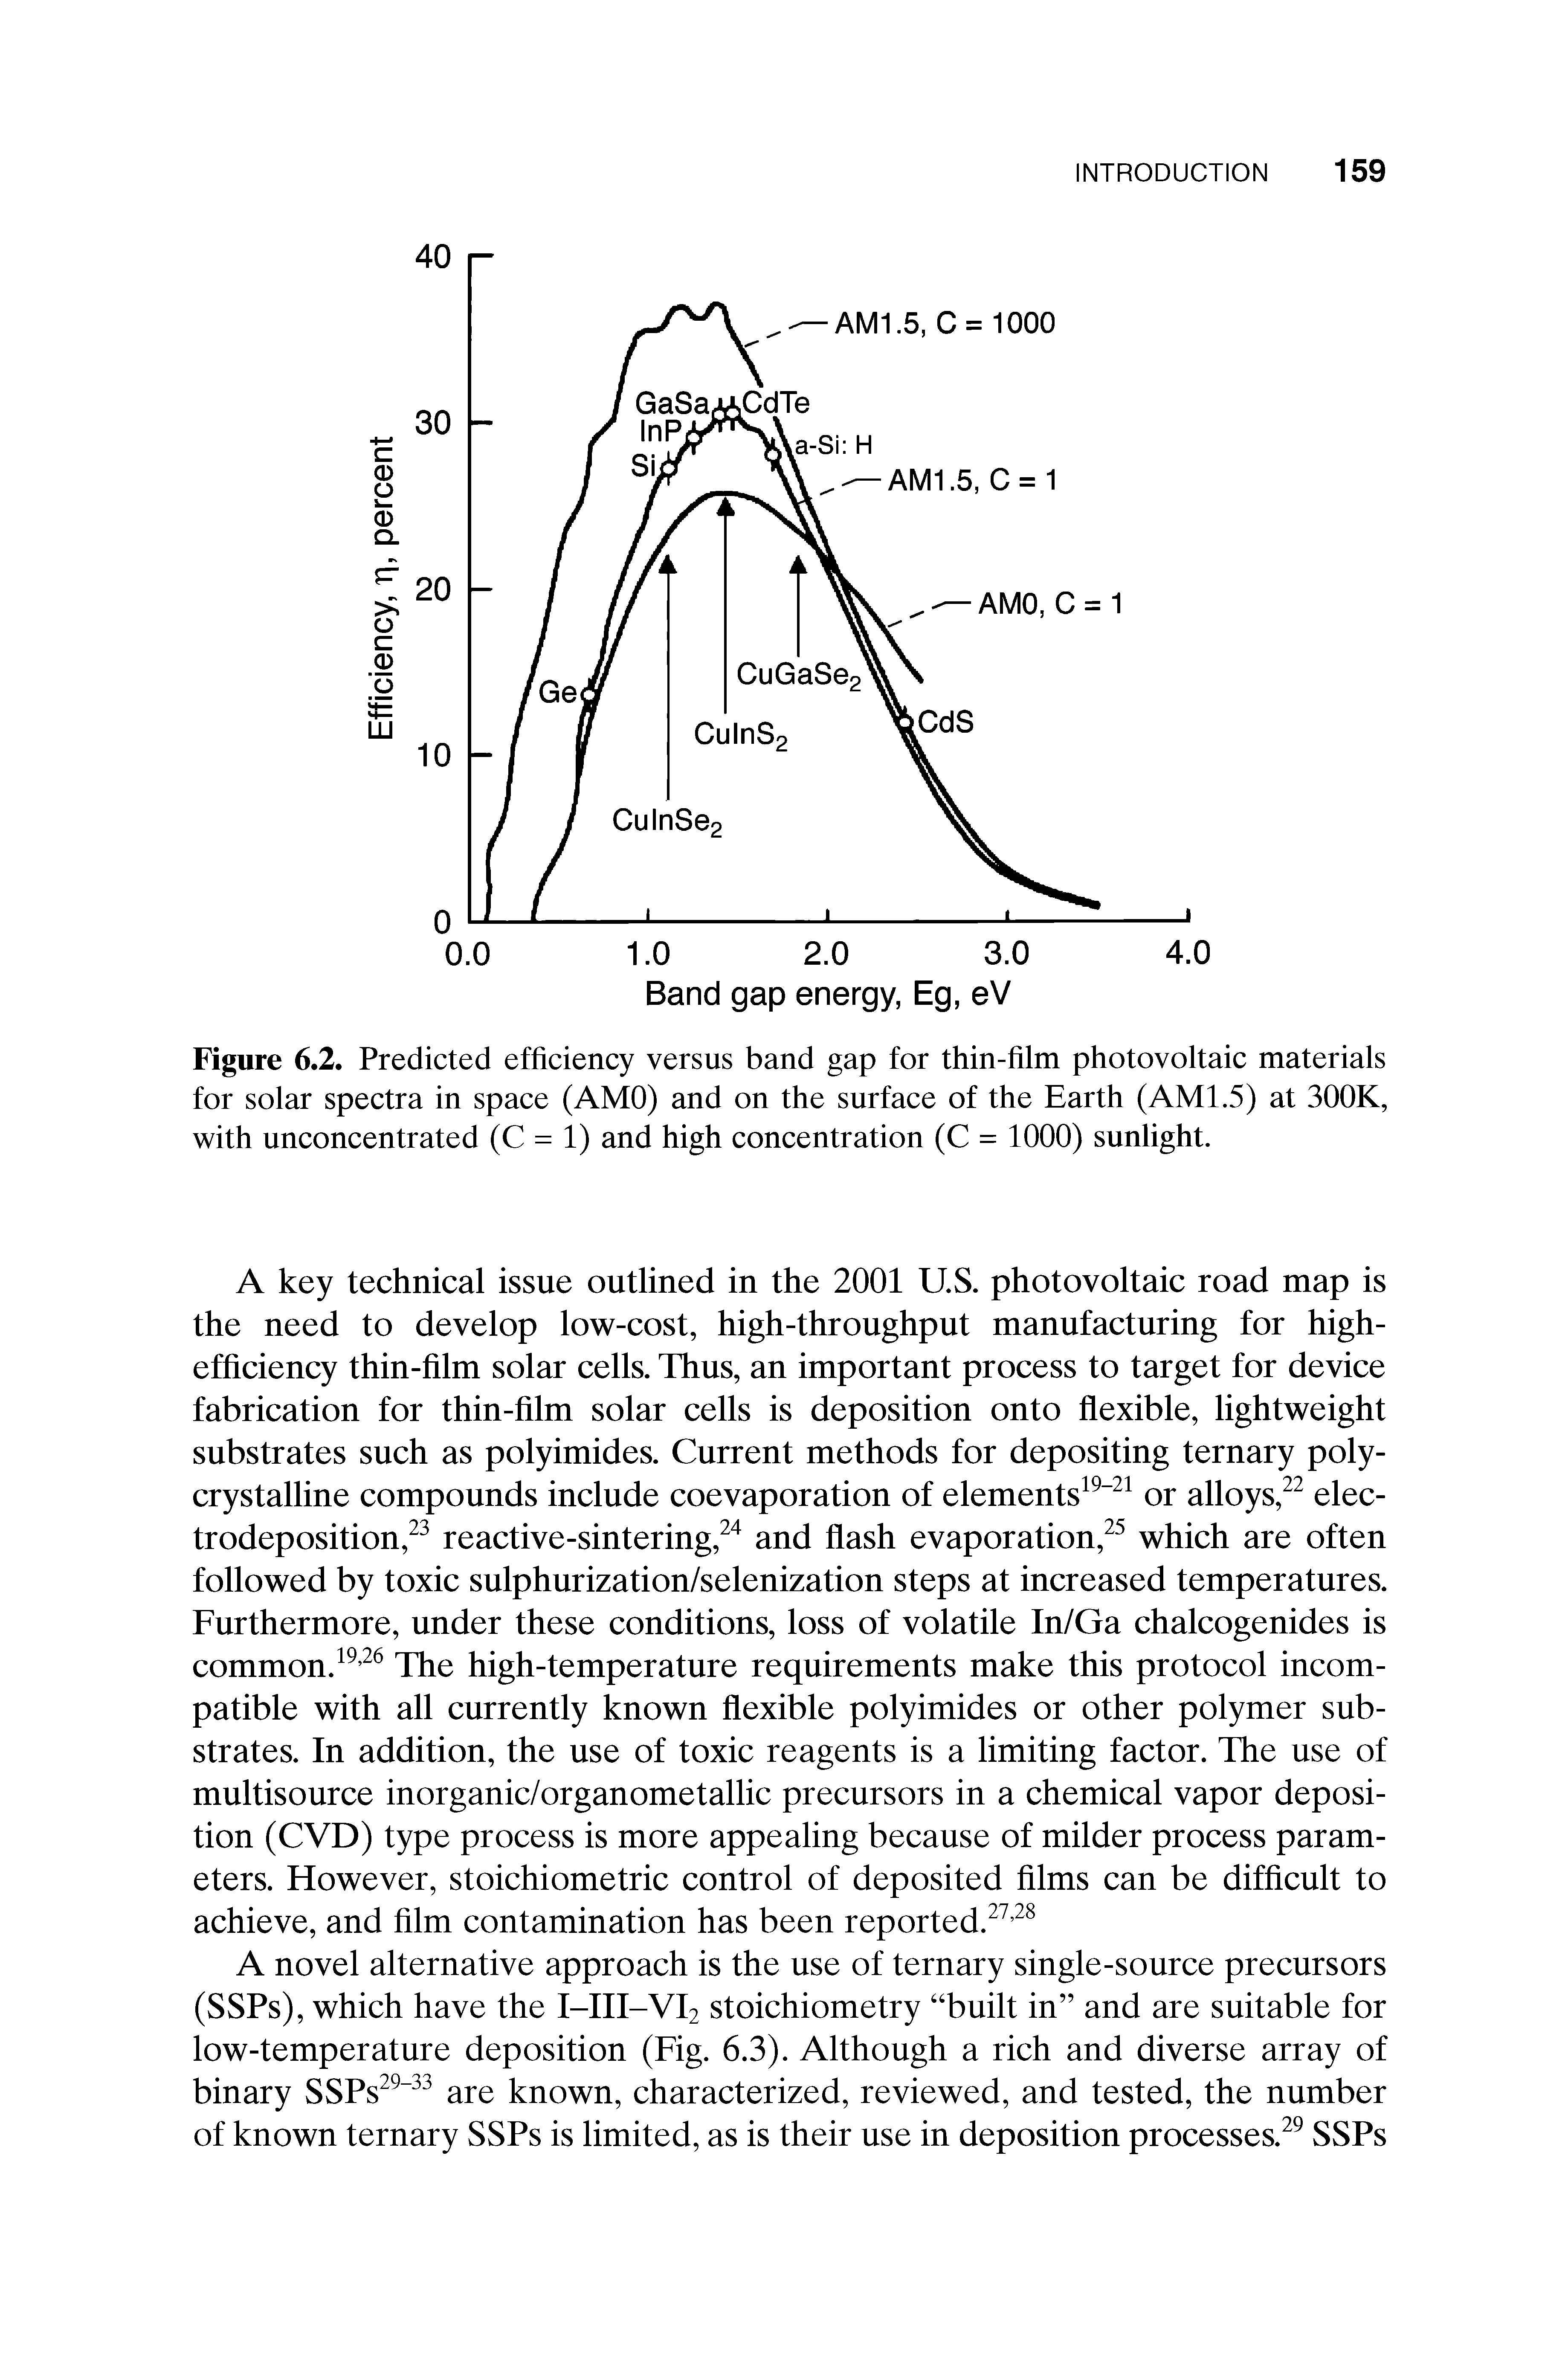 Figure 6.2. Predicted efficiency versus band gap for thin-film photovoltaic materials for solar spectra in space (AMO) and on the surface of the Earth (AMI.5) at 300K, with unconcentrated (C = 1) and high concentration (C = 1000) sunlight.